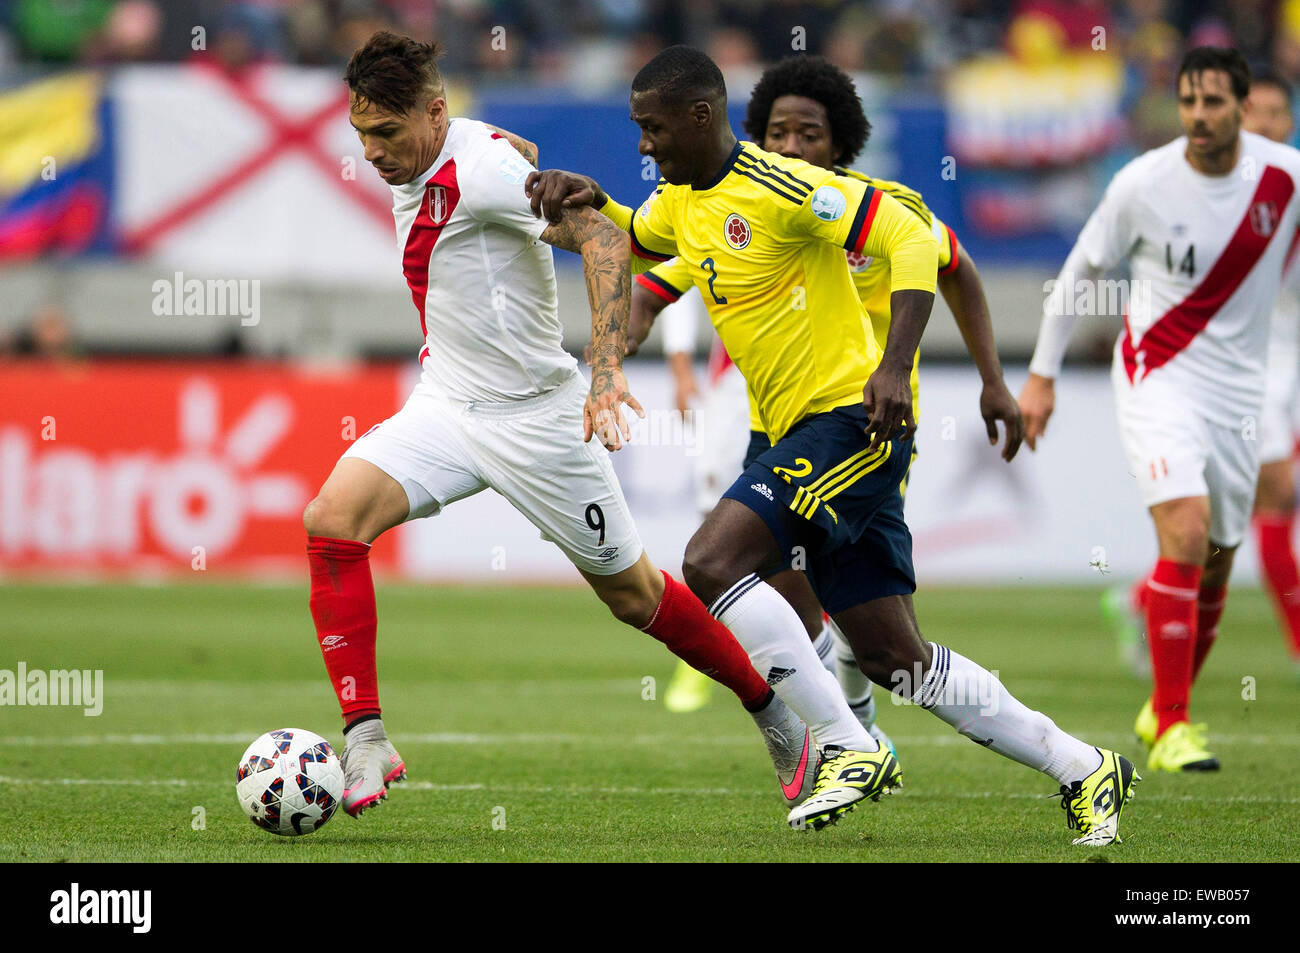 Temuco, Chile. 21st July, 2015. Colombia's Cristian Zapata (front R) vies with Paolo Guerrero (L) of Peru during a Group C match at the 2015 America Cup, held at German Becker in Temuco, Chile, July 21, 2015. The match ended with 0-0. © Pedro Mera/Xinhua/Alamy Live News Stock Photo